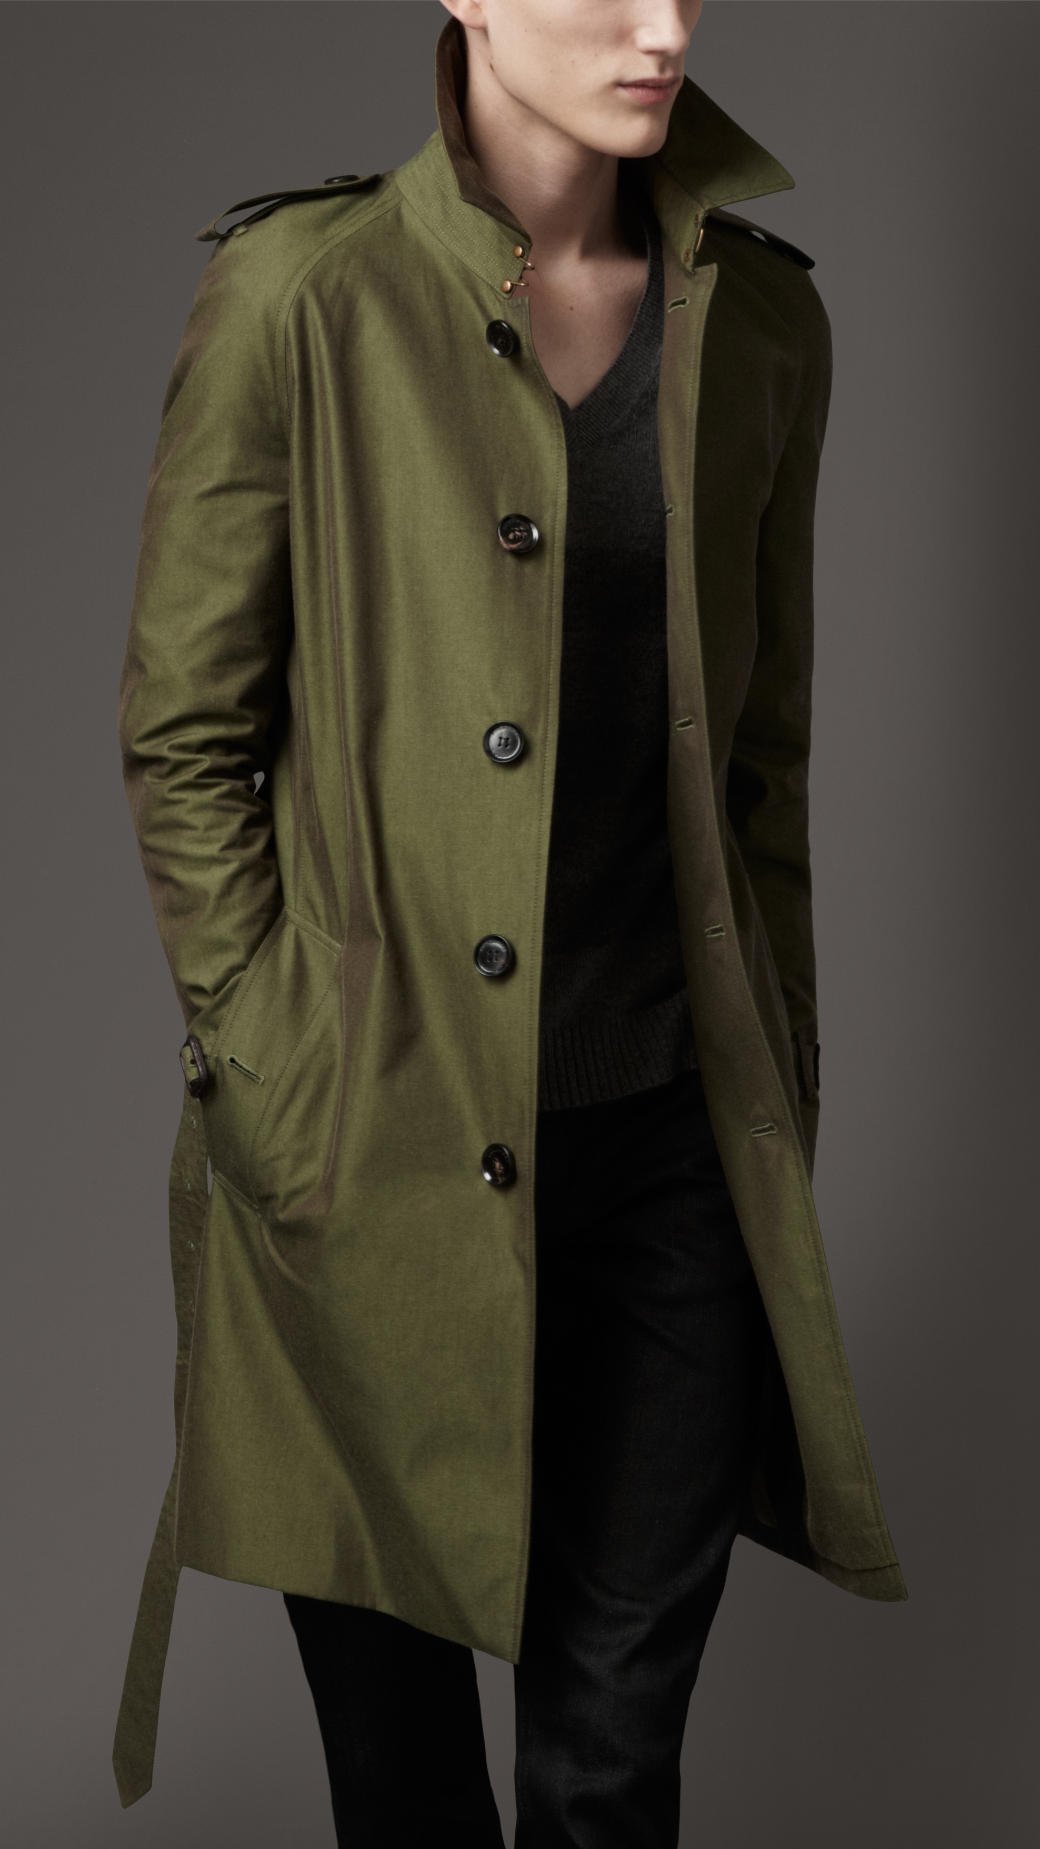 Burberry Classic Cotton Trench Coat in Green for Men - Lyst